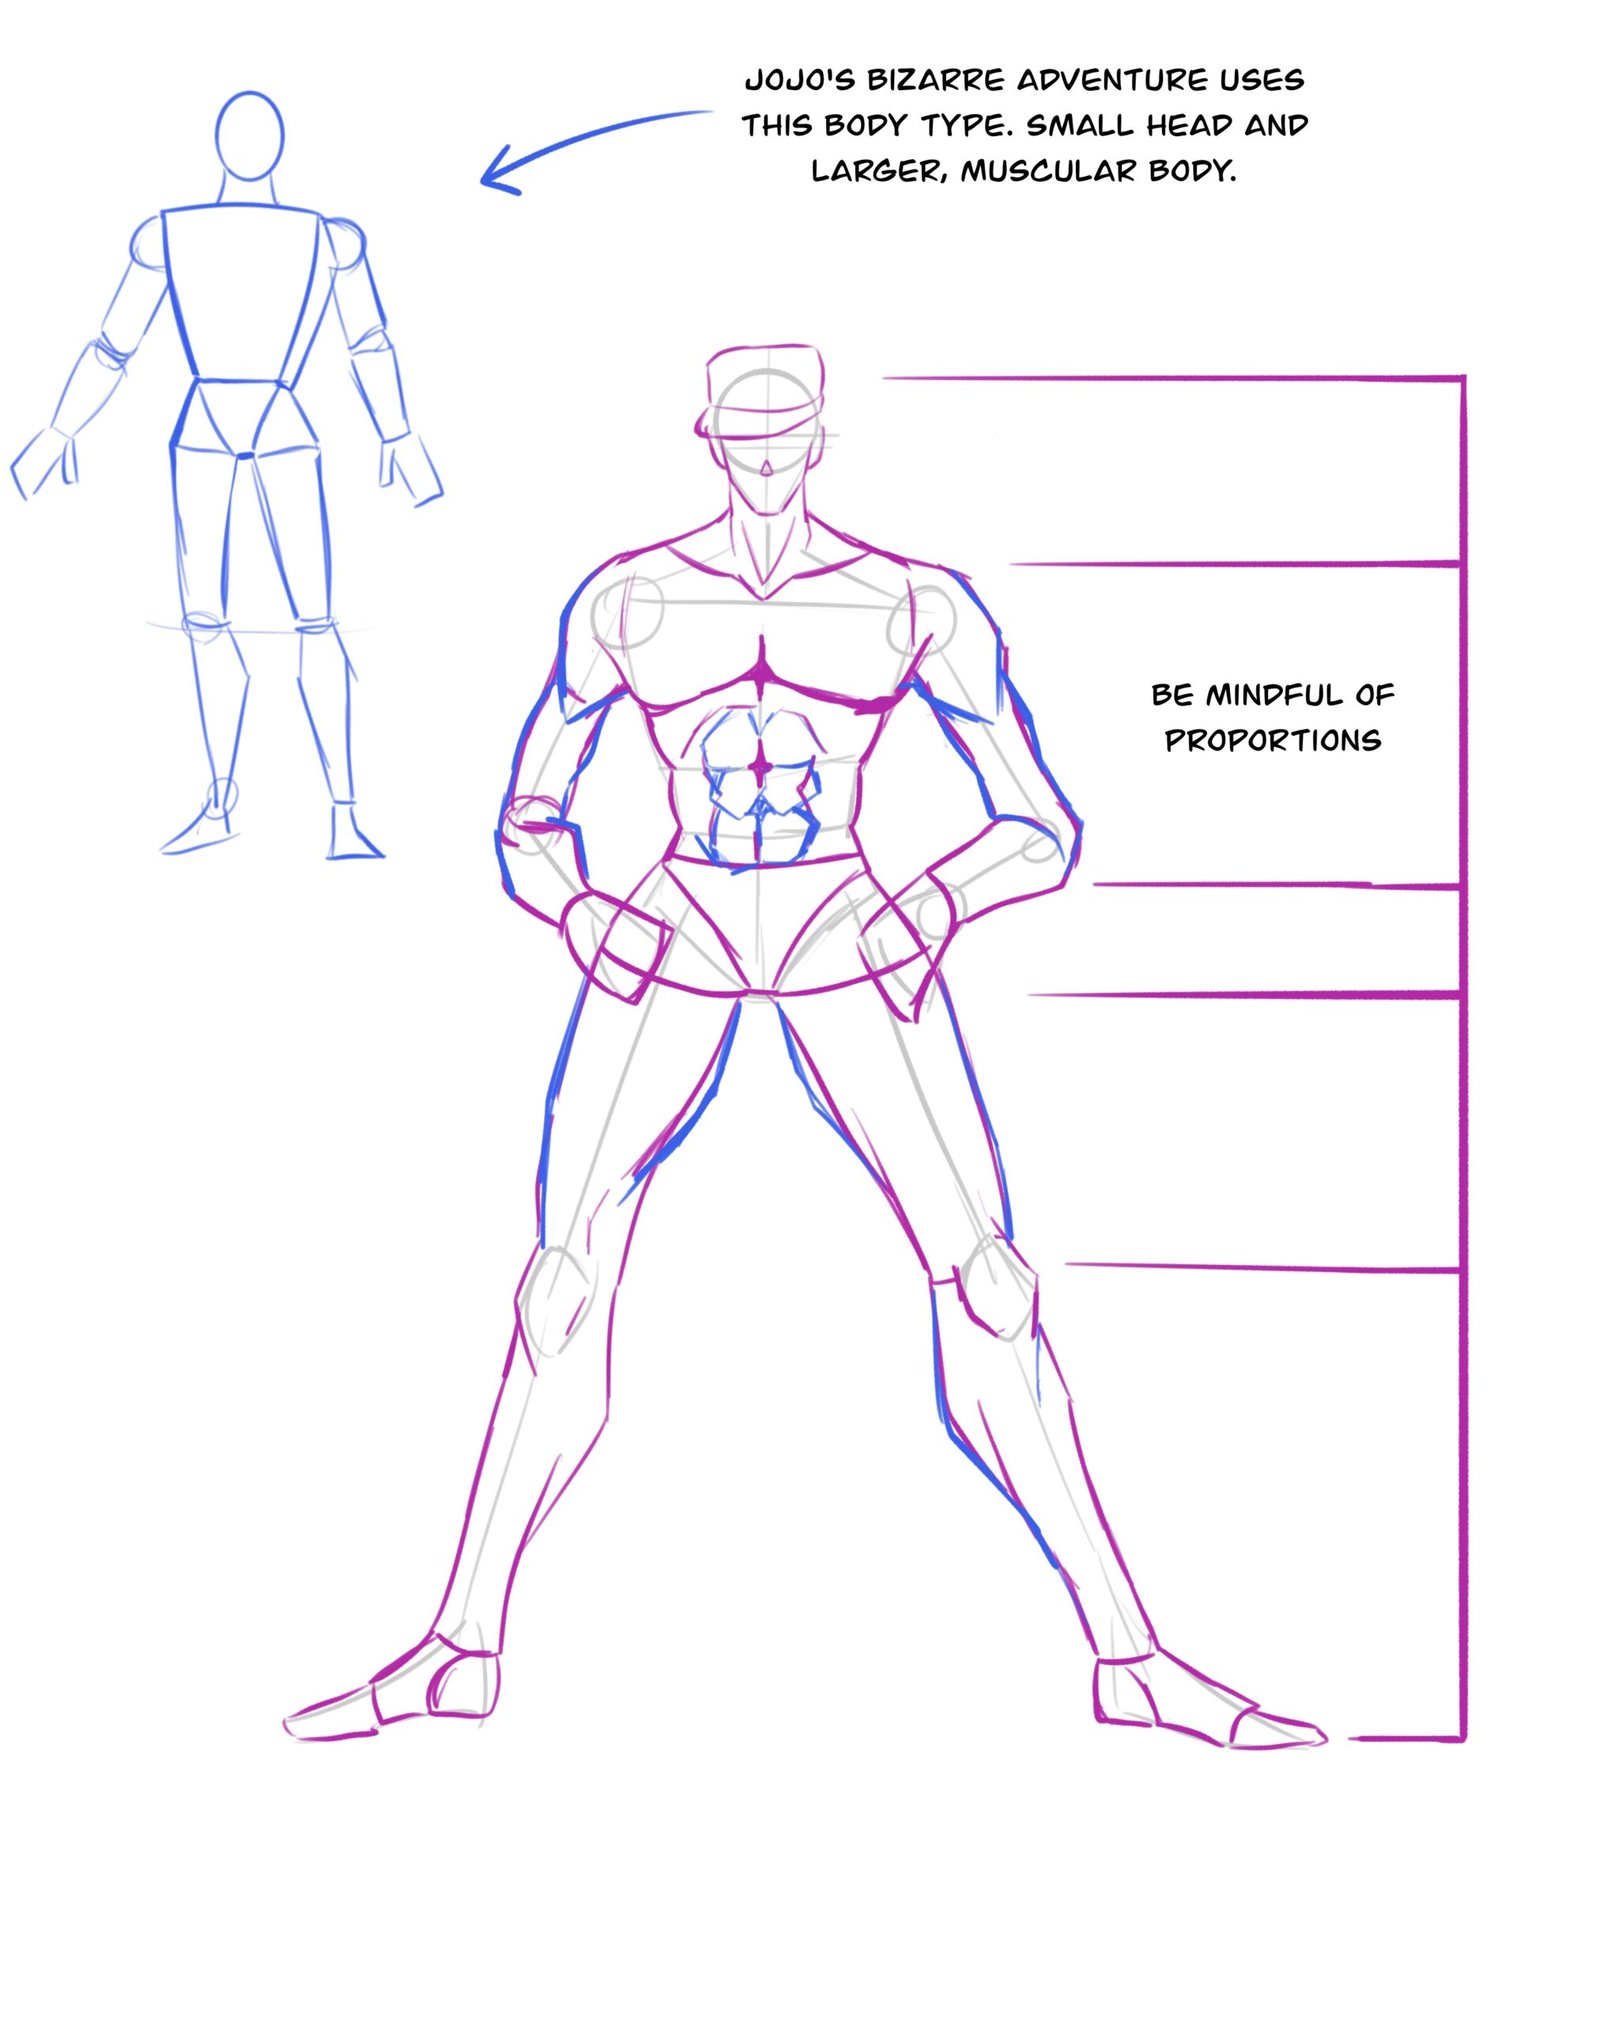 2) Outline face, cap, legs, body, arms and hands